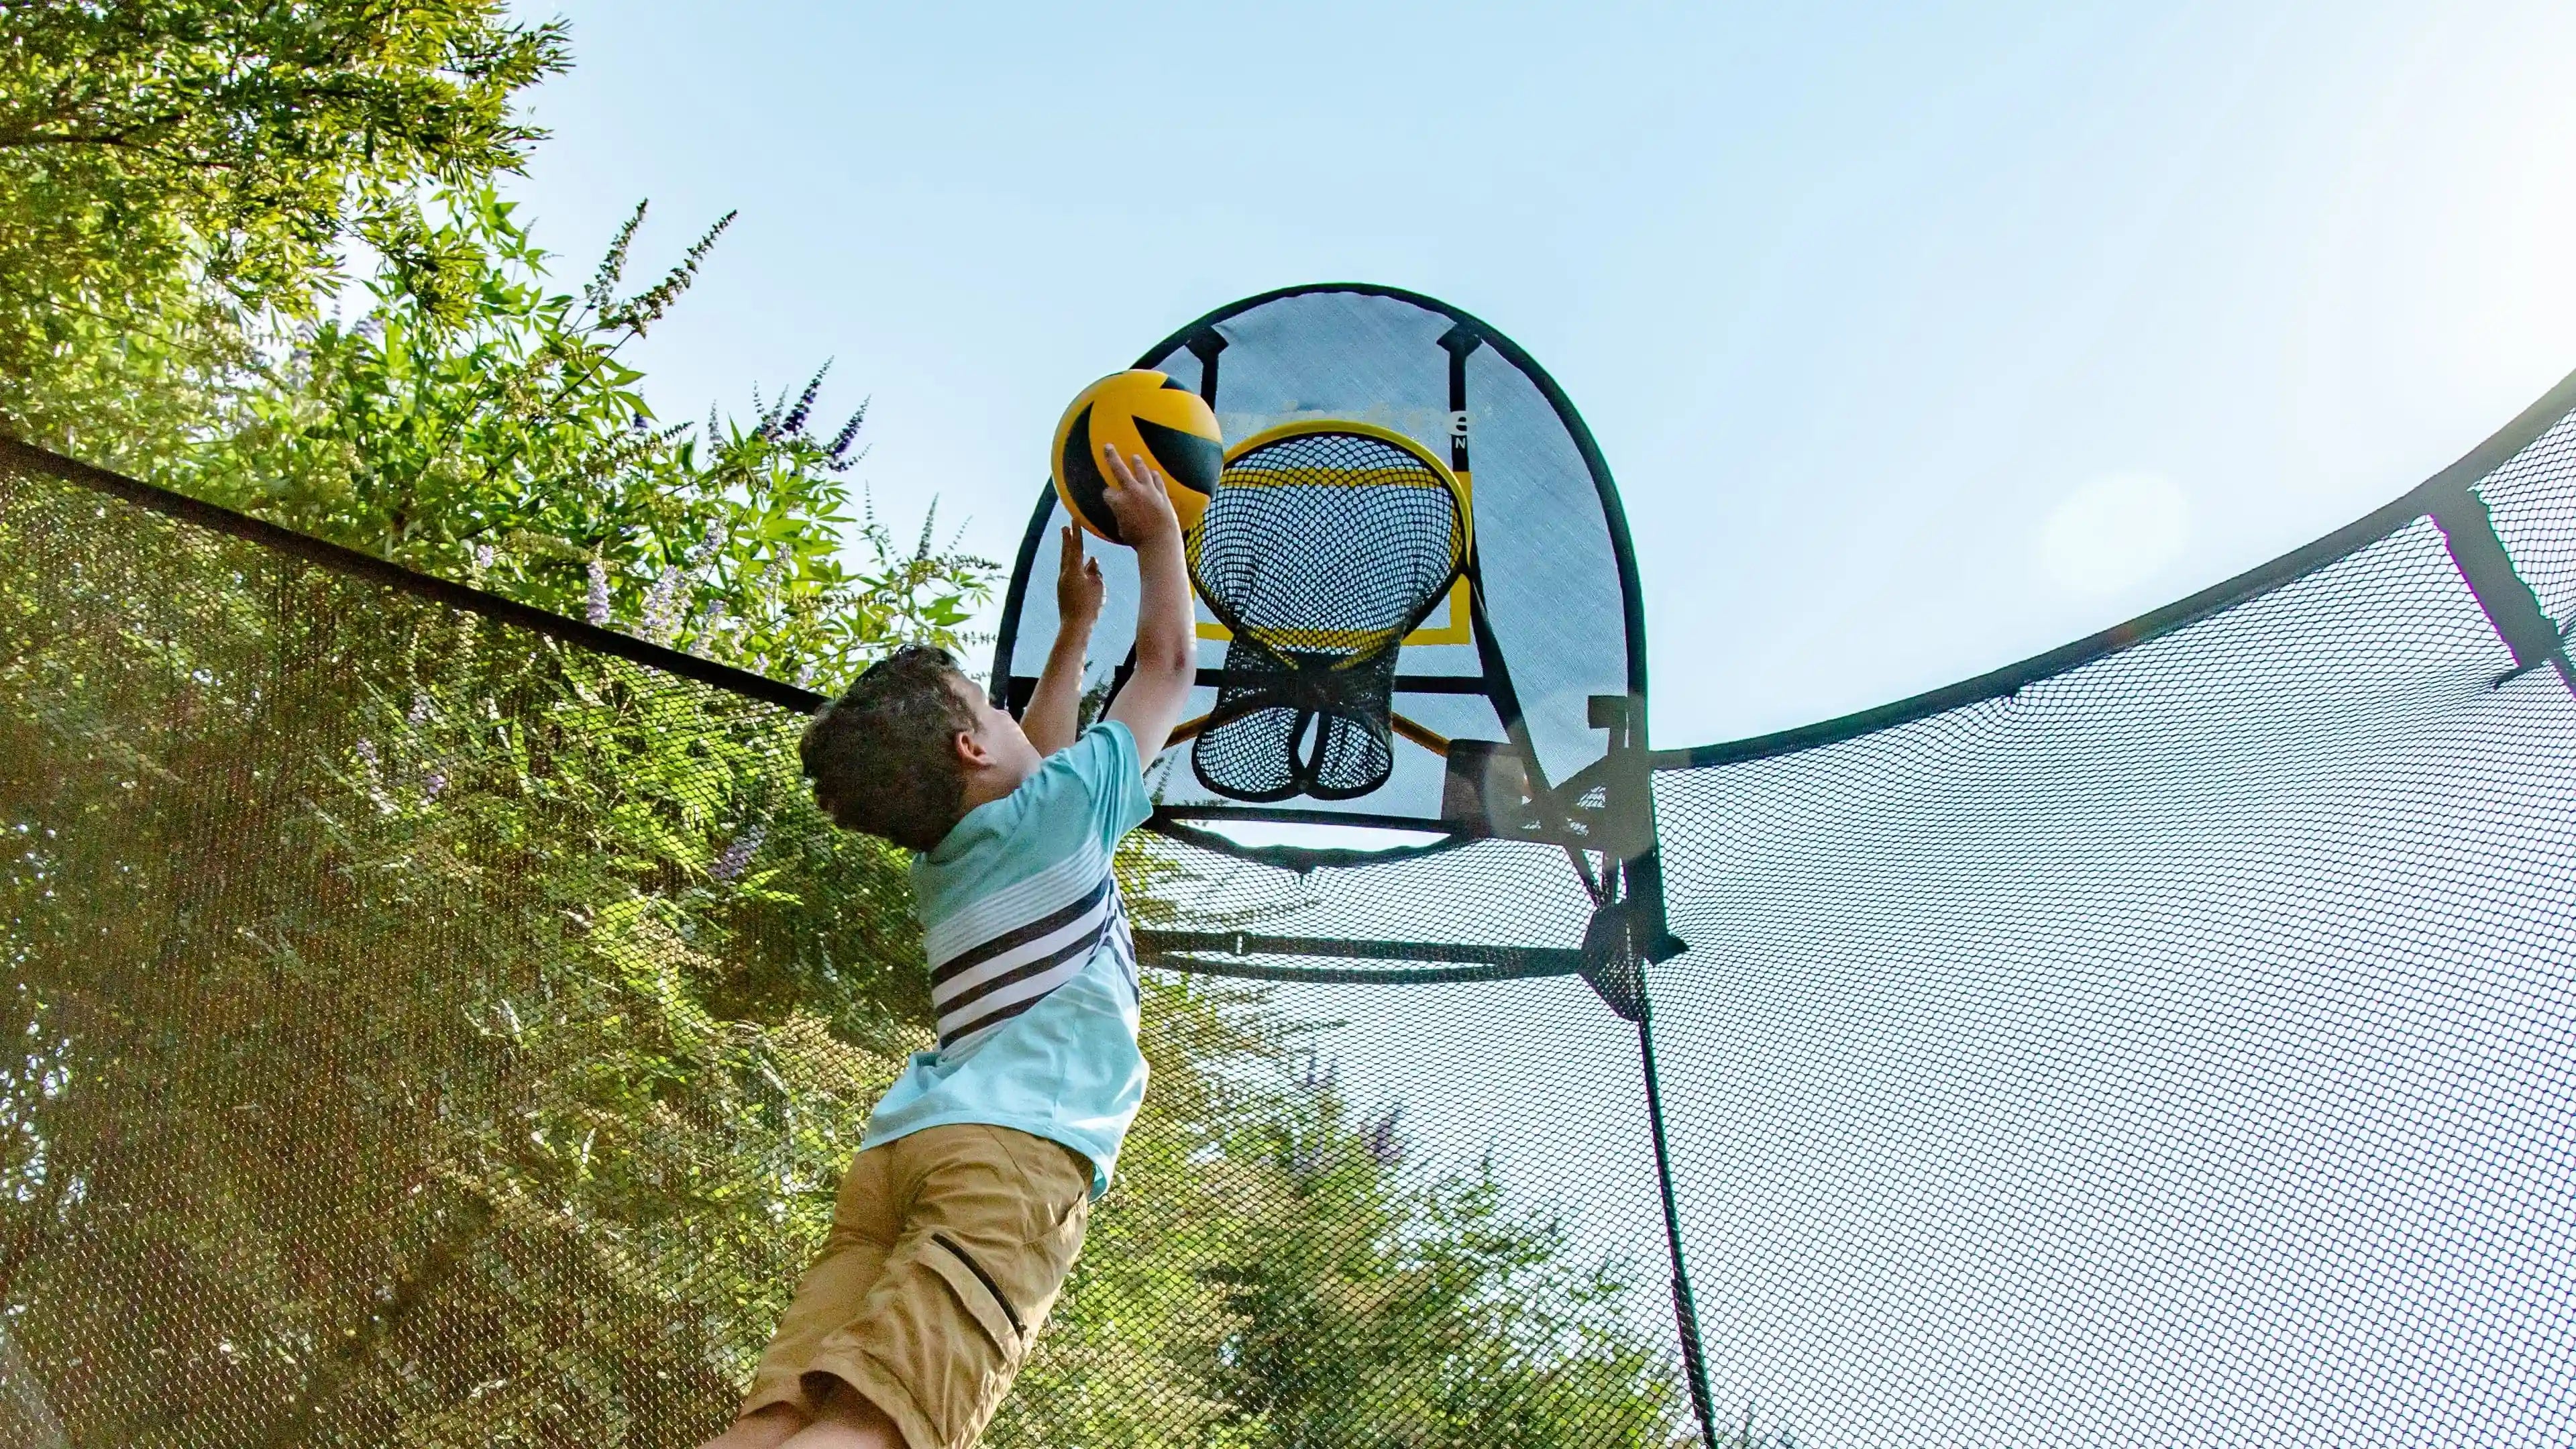 young boy playing basketball with a flexrhoop